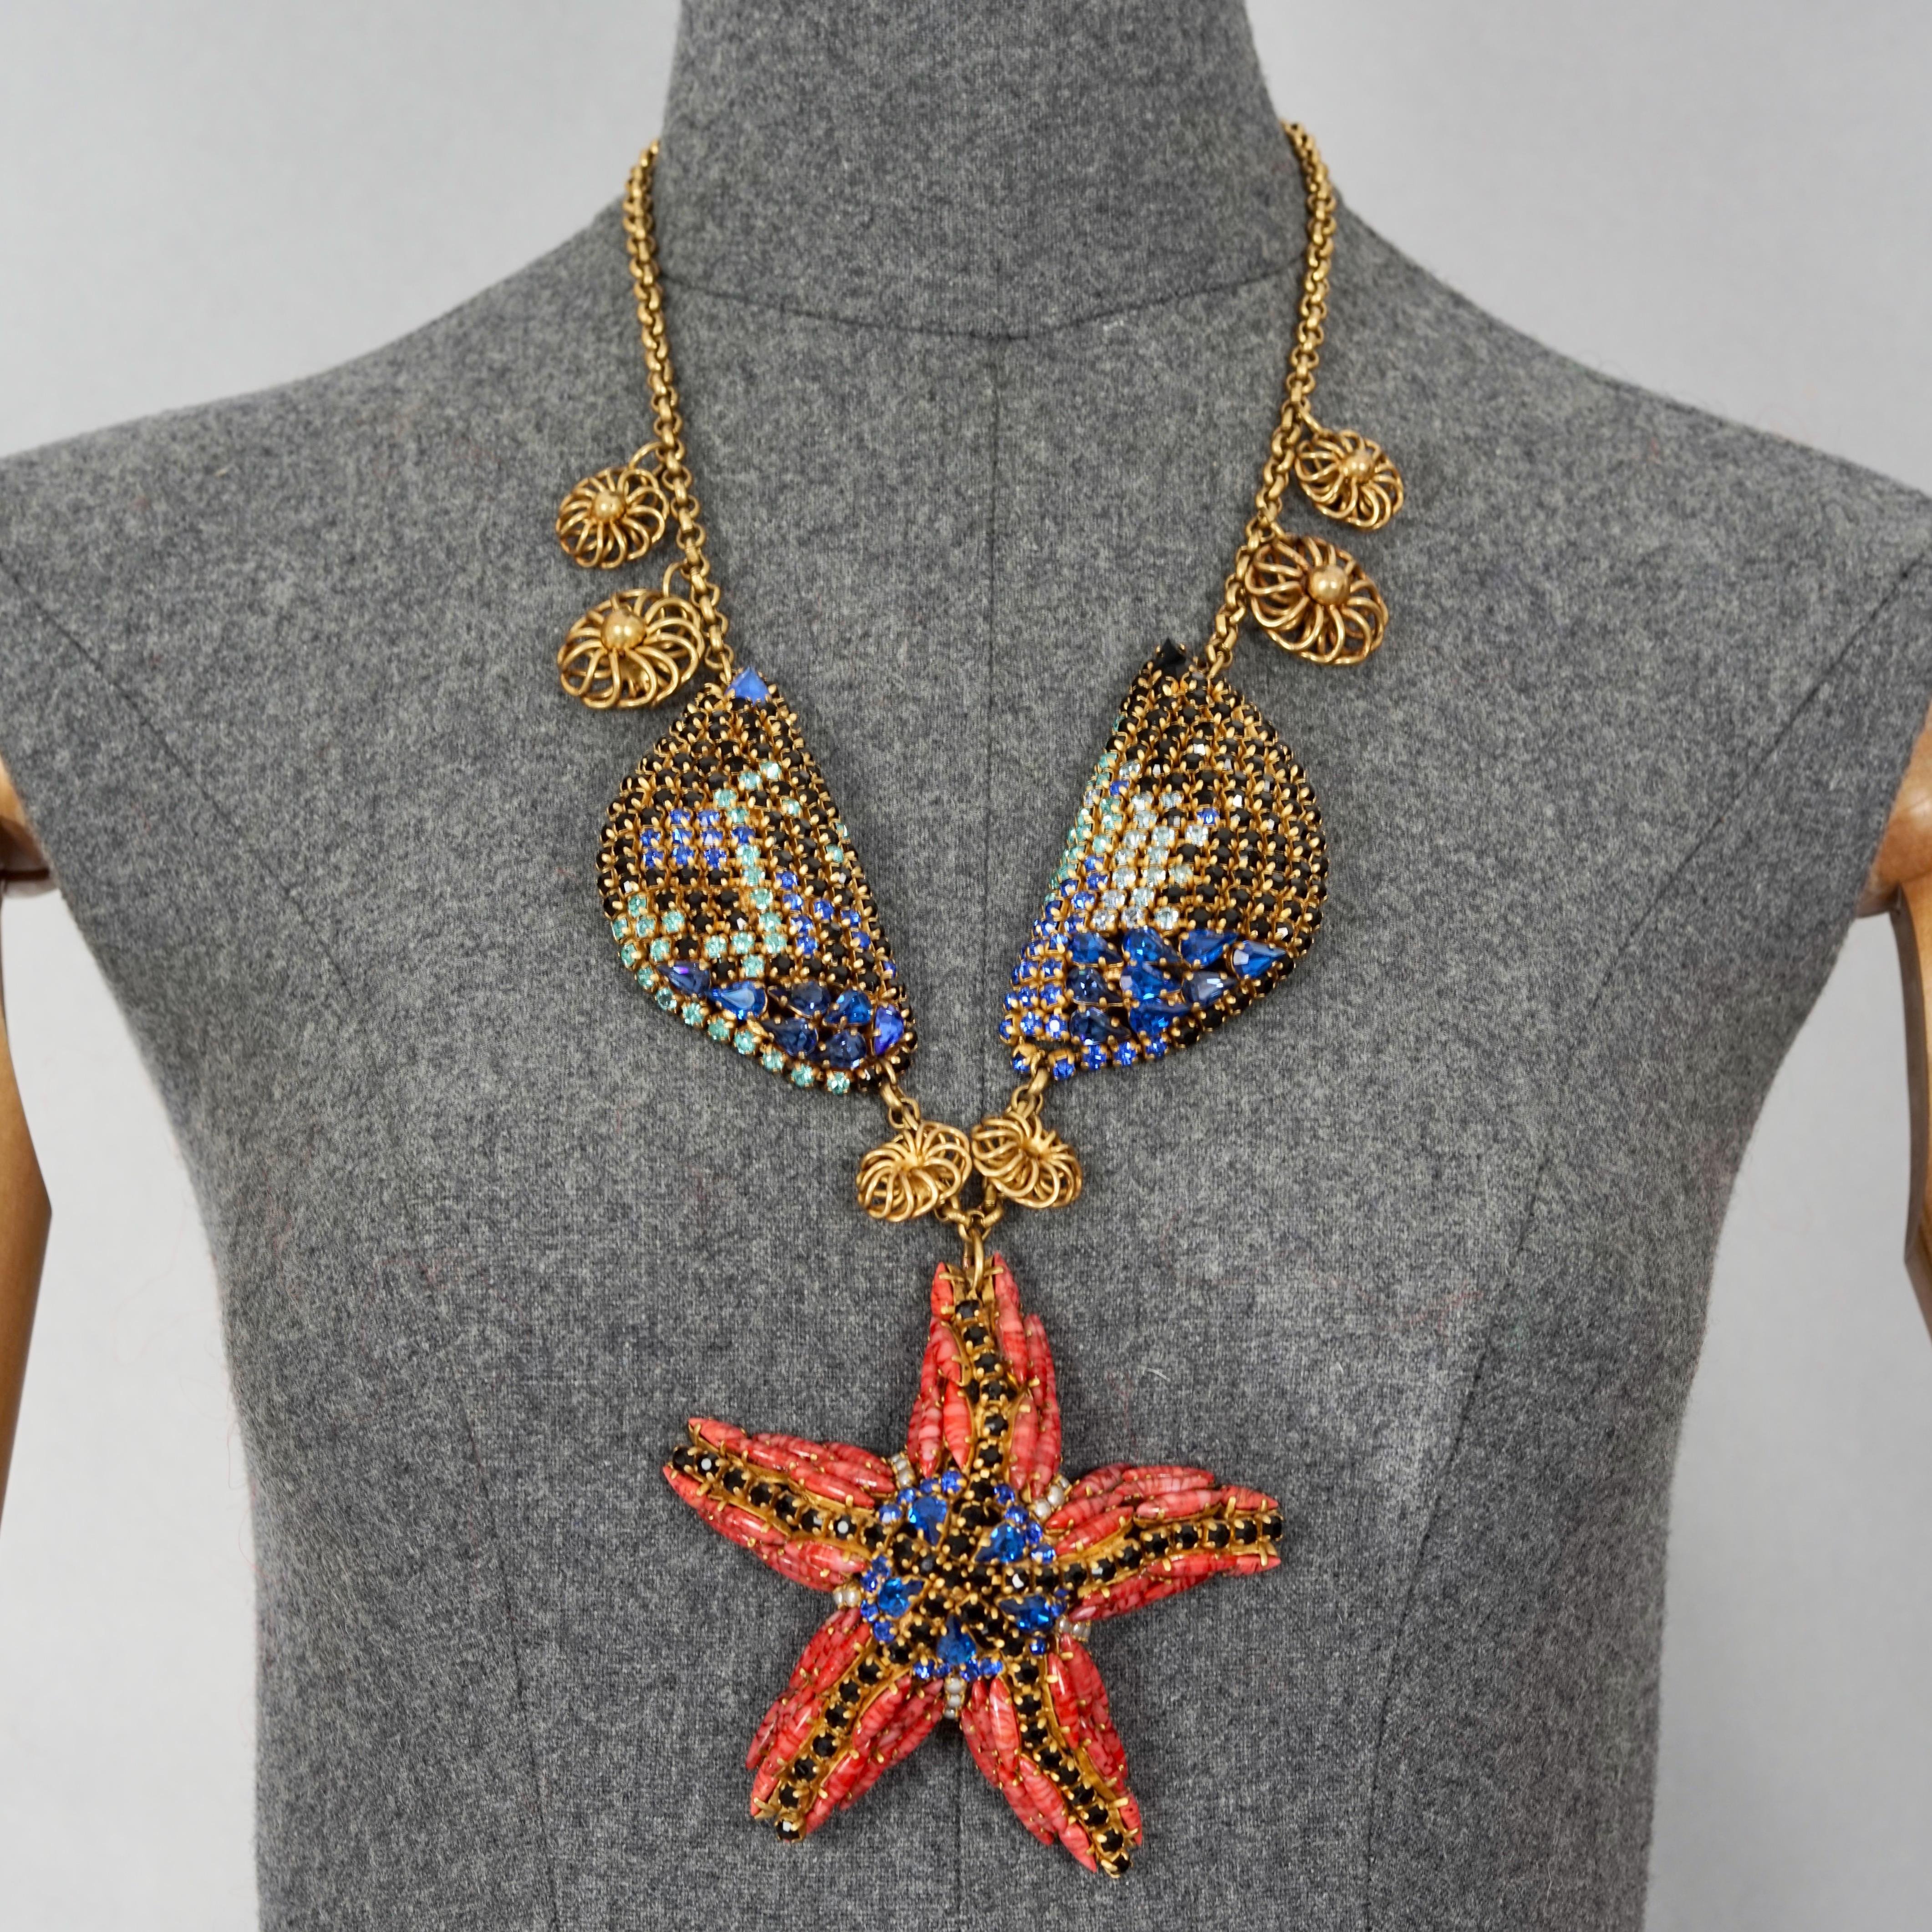 Vintage Massive HANNA BERNHARD Shell Starfish Rhinestone Necklace

Measurements:
Height: 3.93 inches (10 cm)
Wearable Length: 24.40 inches (62 cm)

Features:
- 100% Authentic HANNA BERNHARD.
- Massive starfish and shells studded with rhinestones.
-